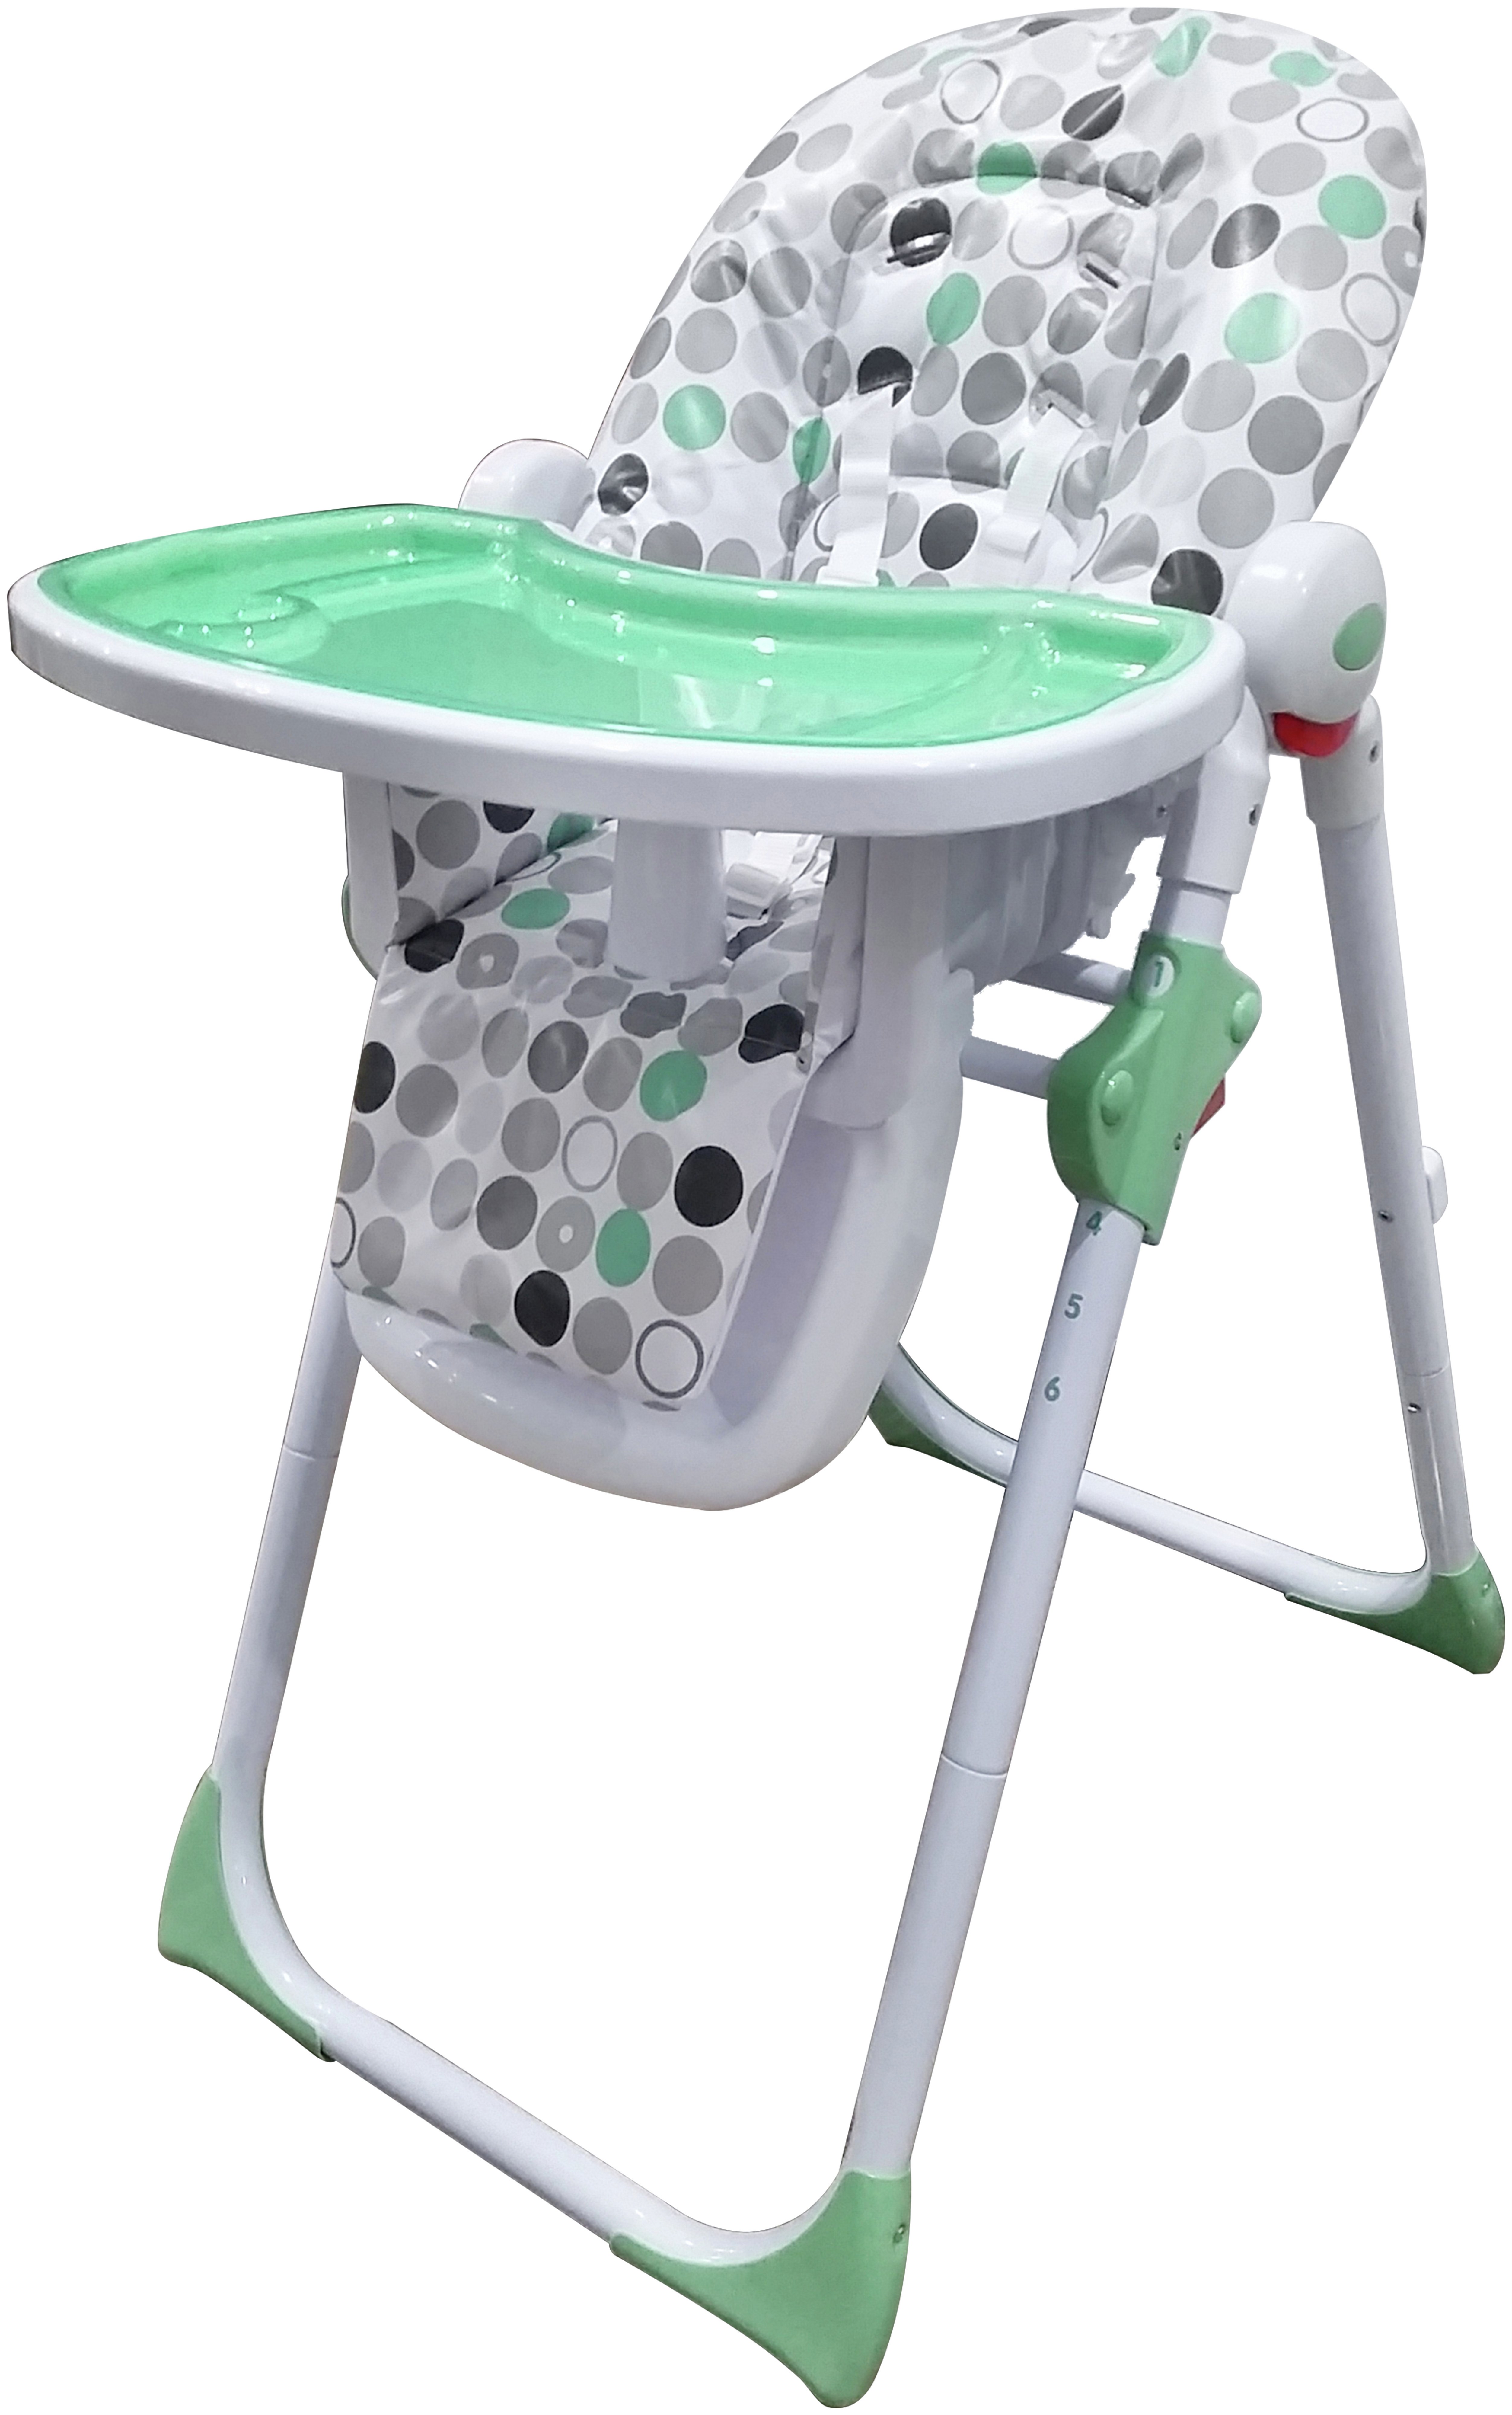 Buy Highchairs at Argos.co.uk - Your Online Shop for Baby and nursery.